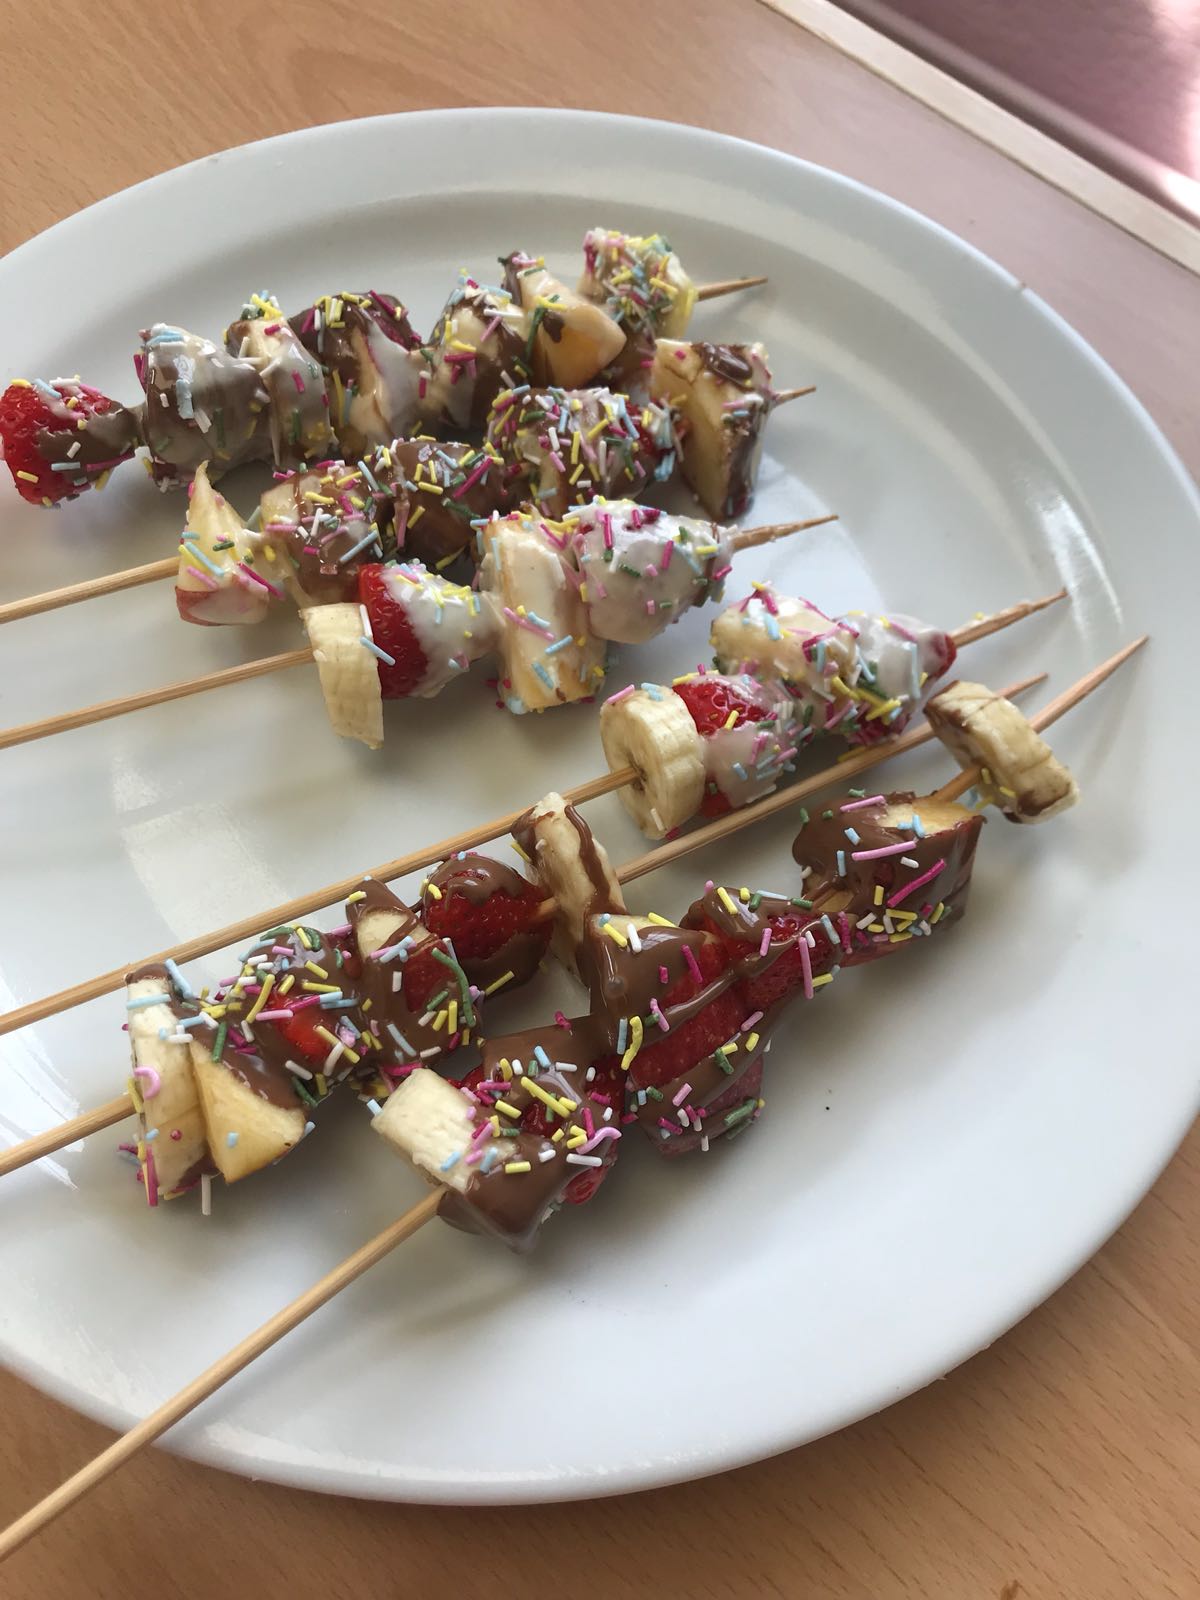 Fruit Kebabs 18: Key Healthcare is dedicated to caring for elderly residents in safe. We have multiple dementia care homes including our care home middlesbrough, our care home St. Helen and care home saltburn. We excel in monitoring and improving care levels.